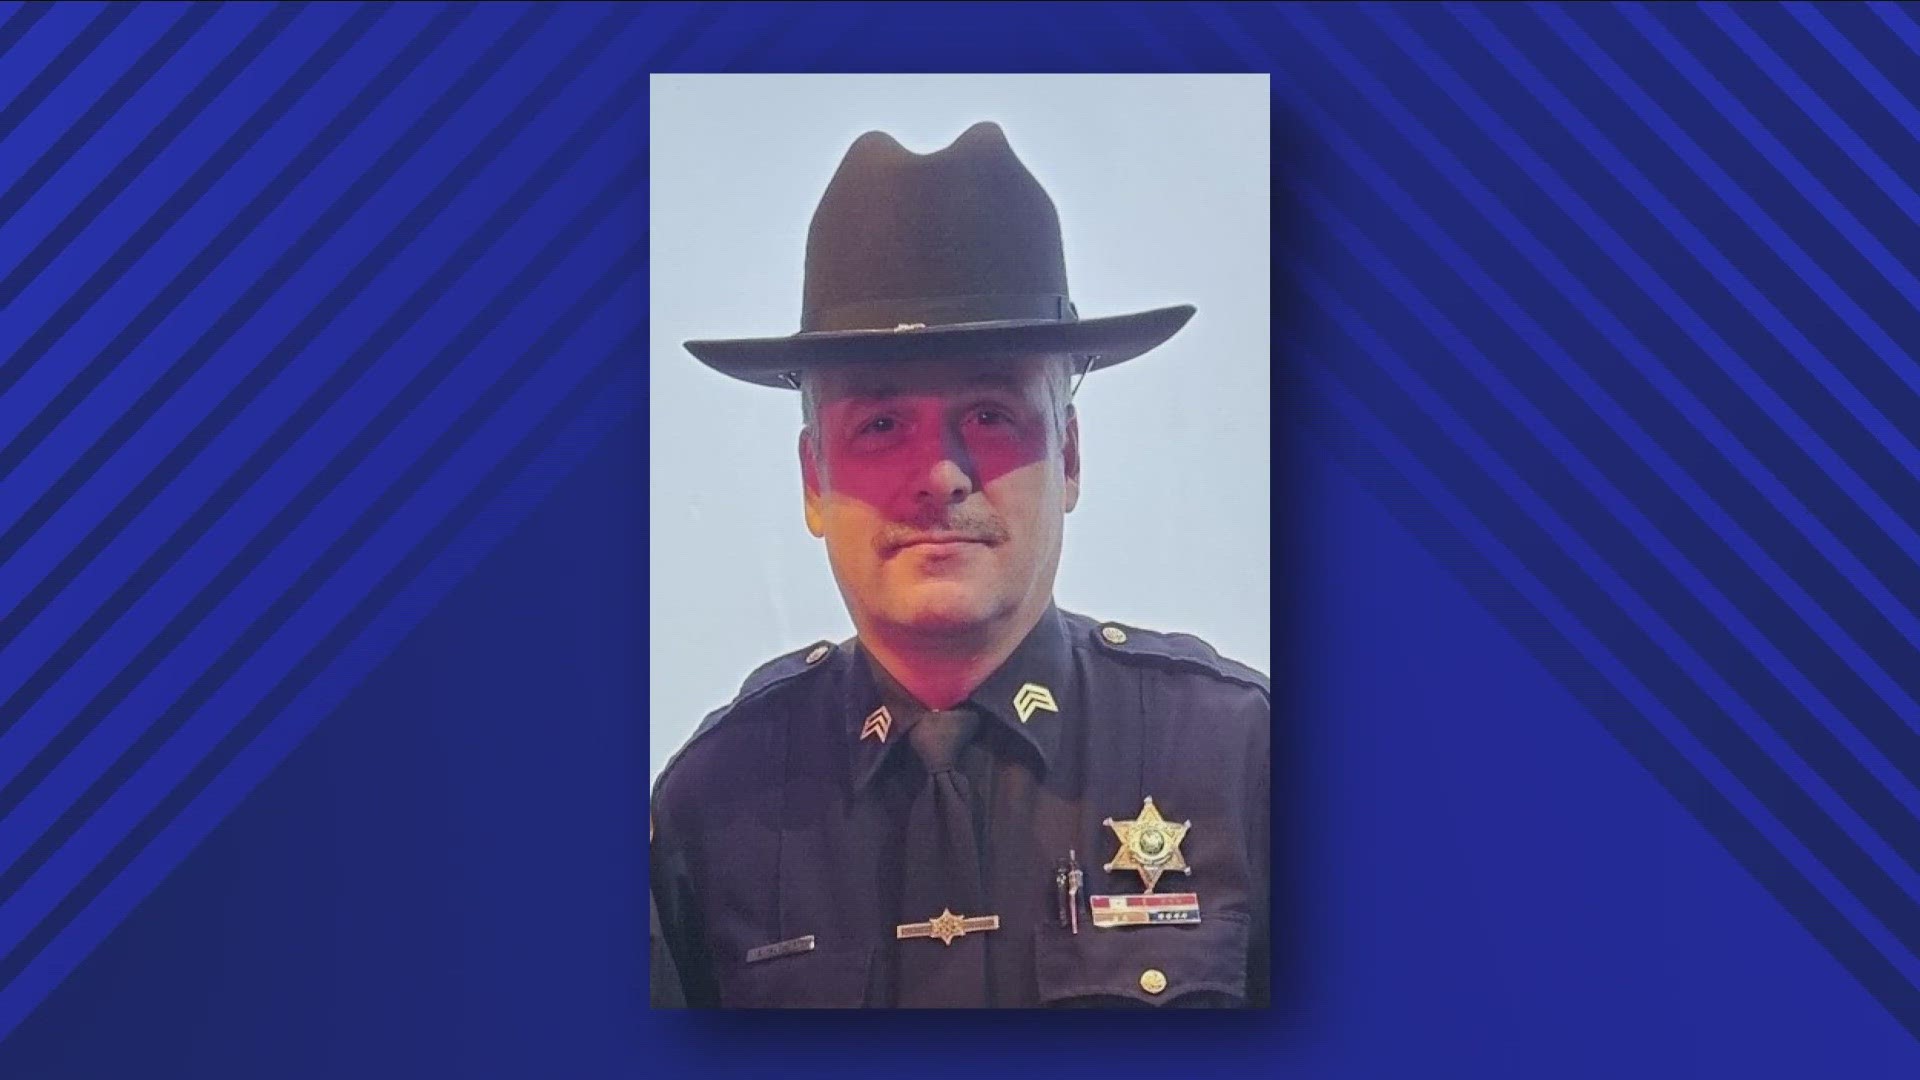 Sergeant Thomas A. Sanfratello, a 32-year veteran of the Genesee County Sheriff's Office, died while he was working a special assignment detail at Batavia Downs.